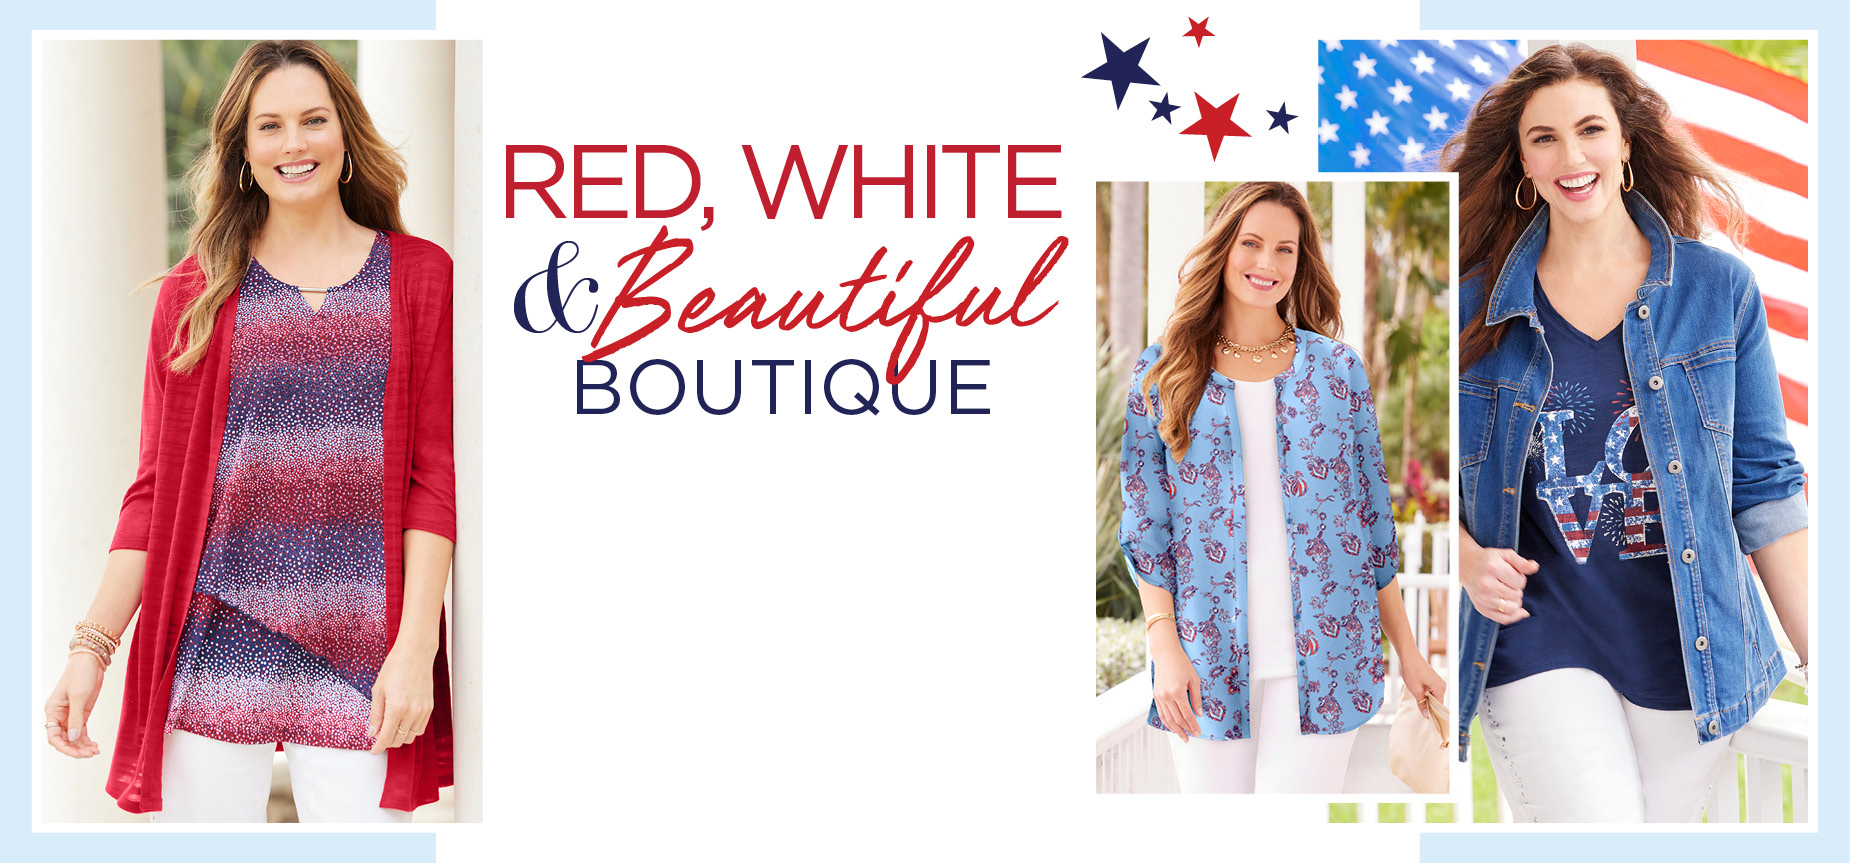 SHOP THE RED WHITE AND BEAUTIFUL BOUTIQUE